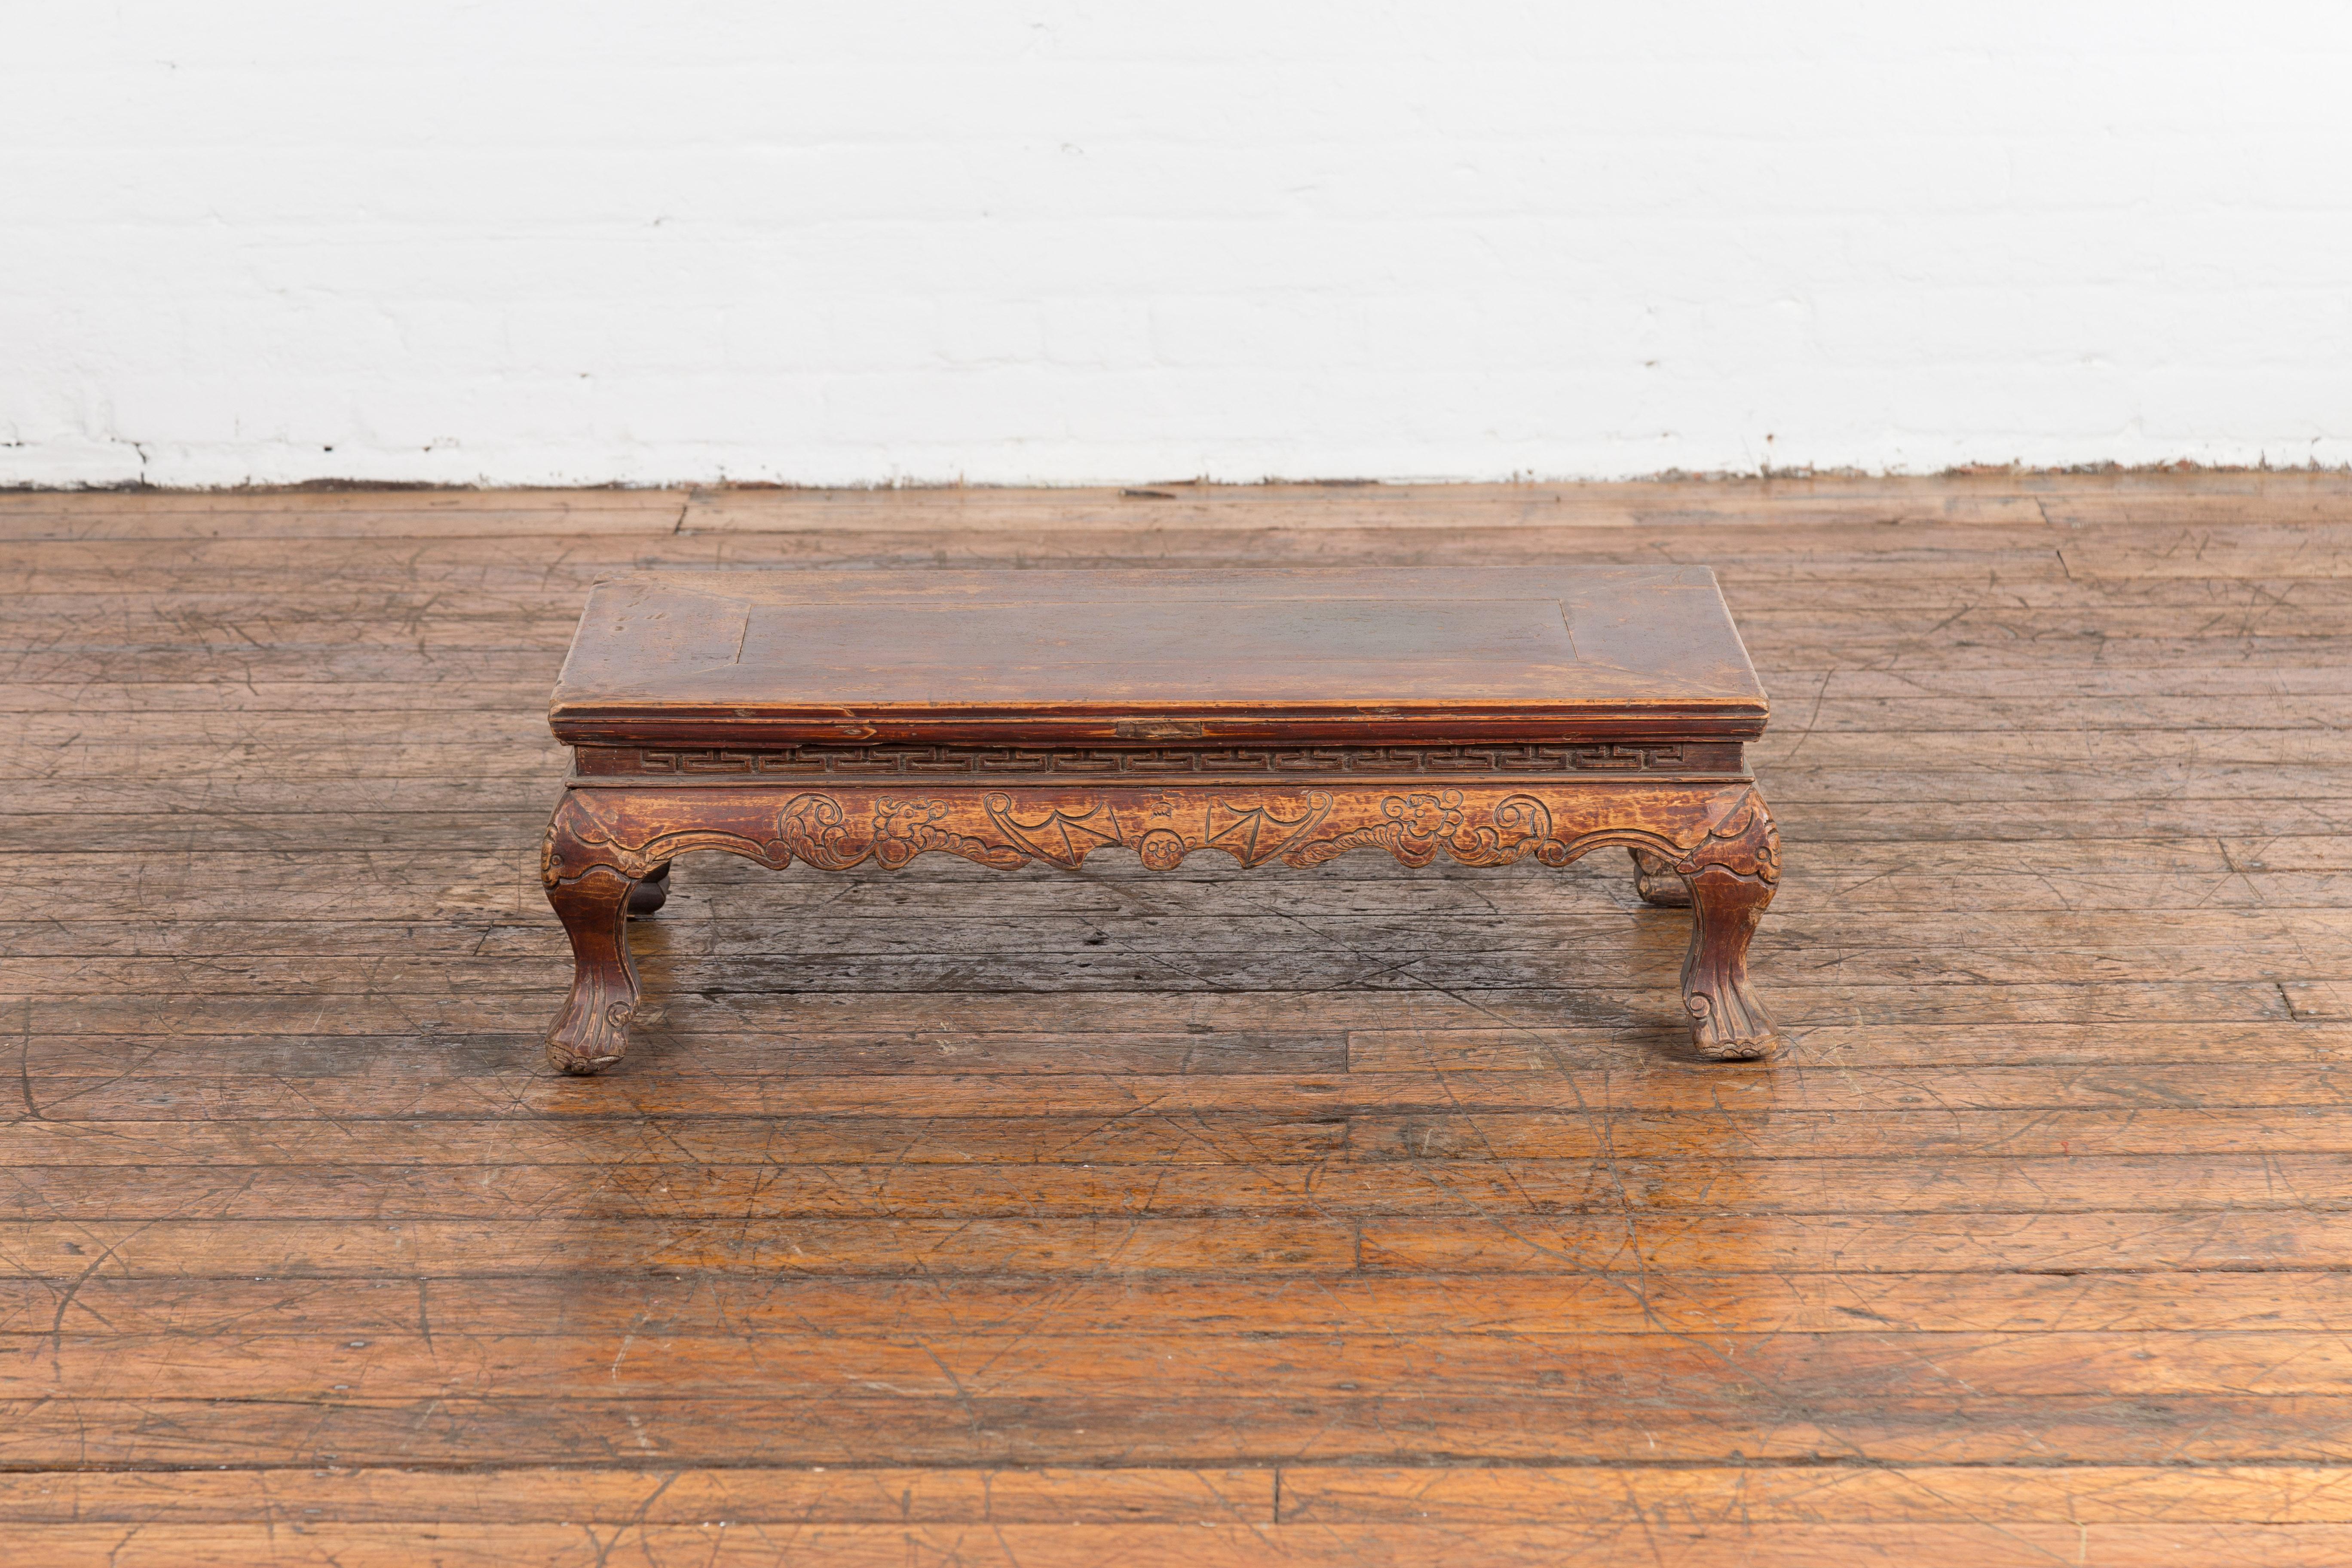 19th Century Chinese Qing Dynasty Period Low Kang Table with Carved Bats and Cabriole Legs For Sale